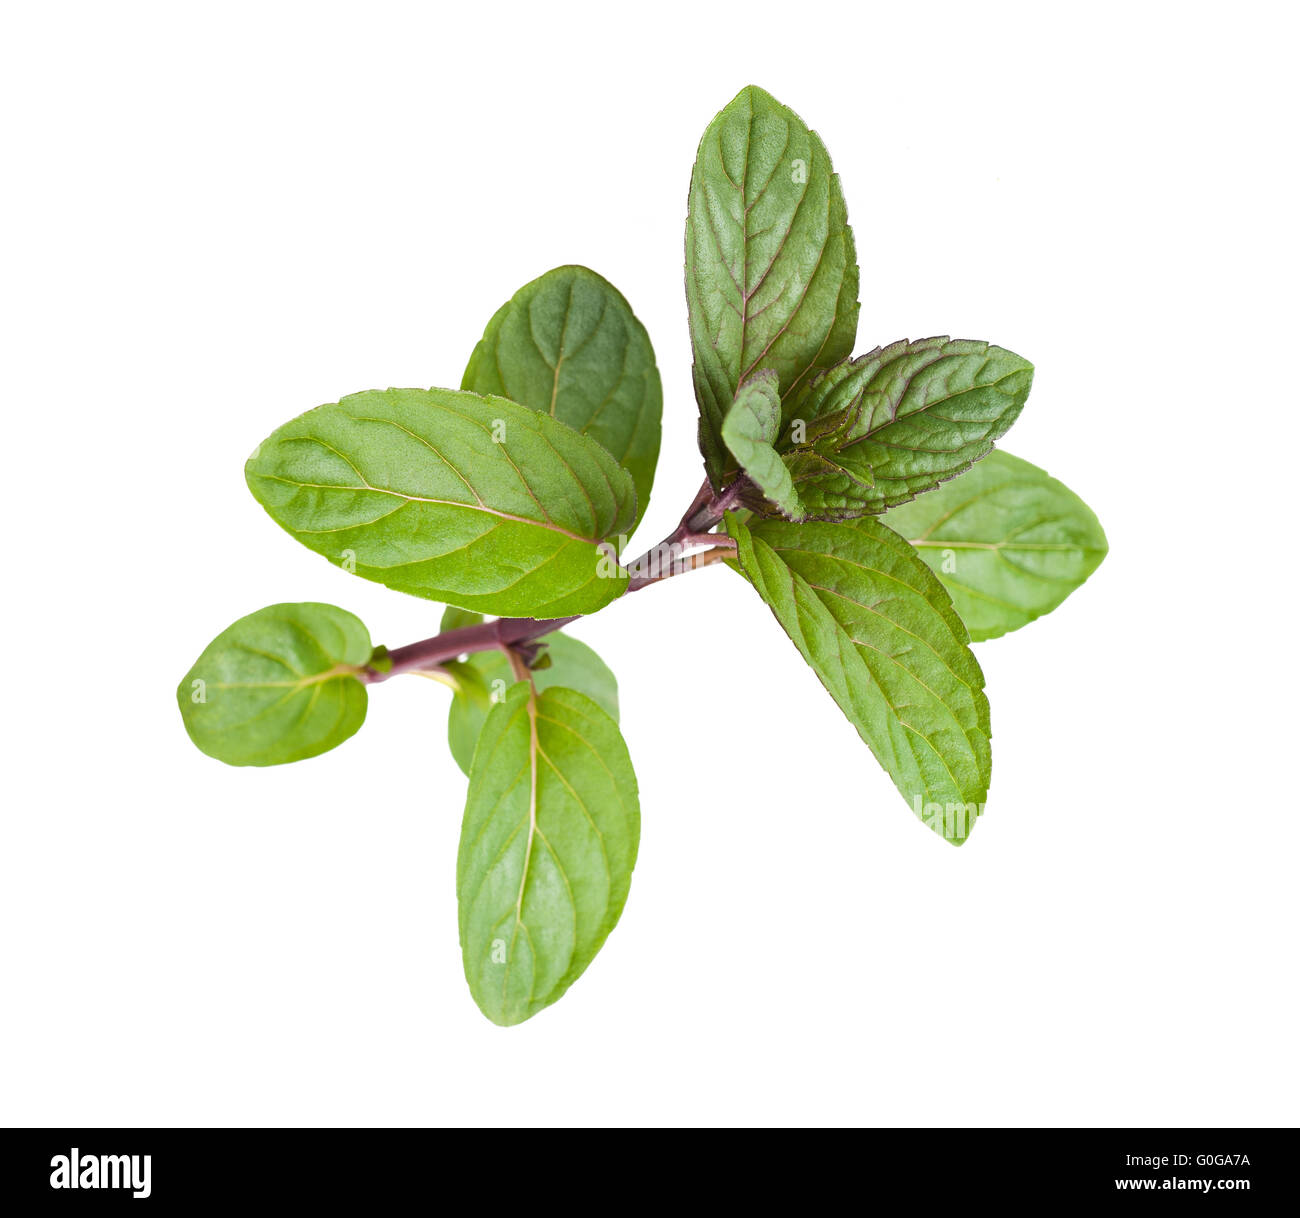 Peppermint leaves isolated on white background Stock Photo